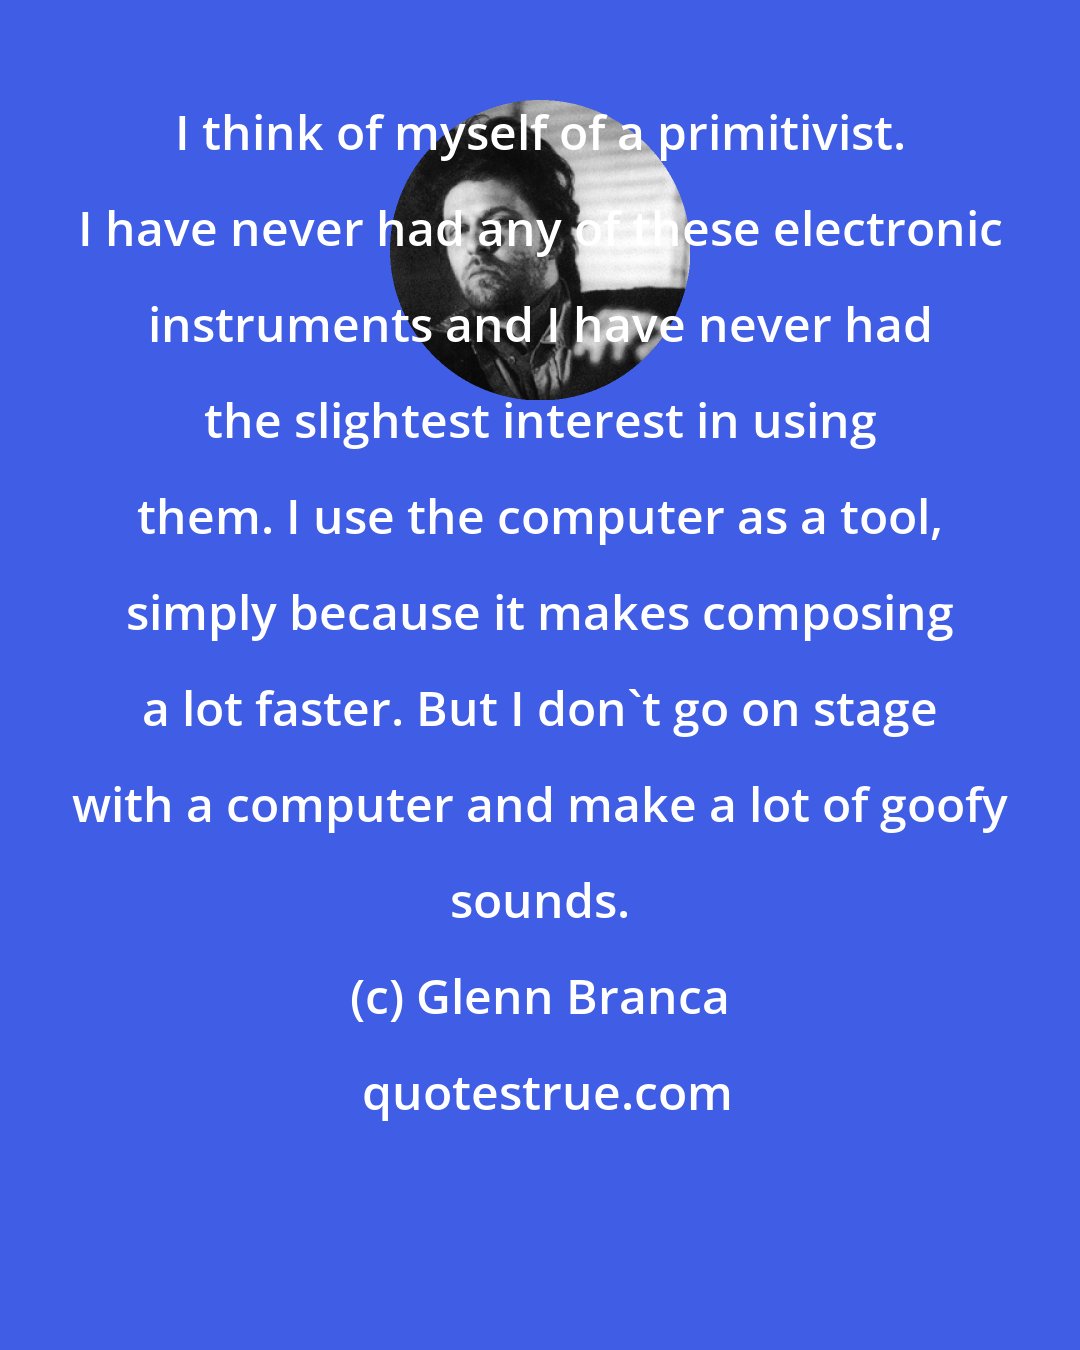 Glenn Branca: I think of myself of a primitivist. I have never had any of these electronic instruments and I have never had the slightest interest in using them. I use the computer as a tool, simply because it makes composing a lot faster. But I don't go on stage with a computer and make a lot of goofy sounds.